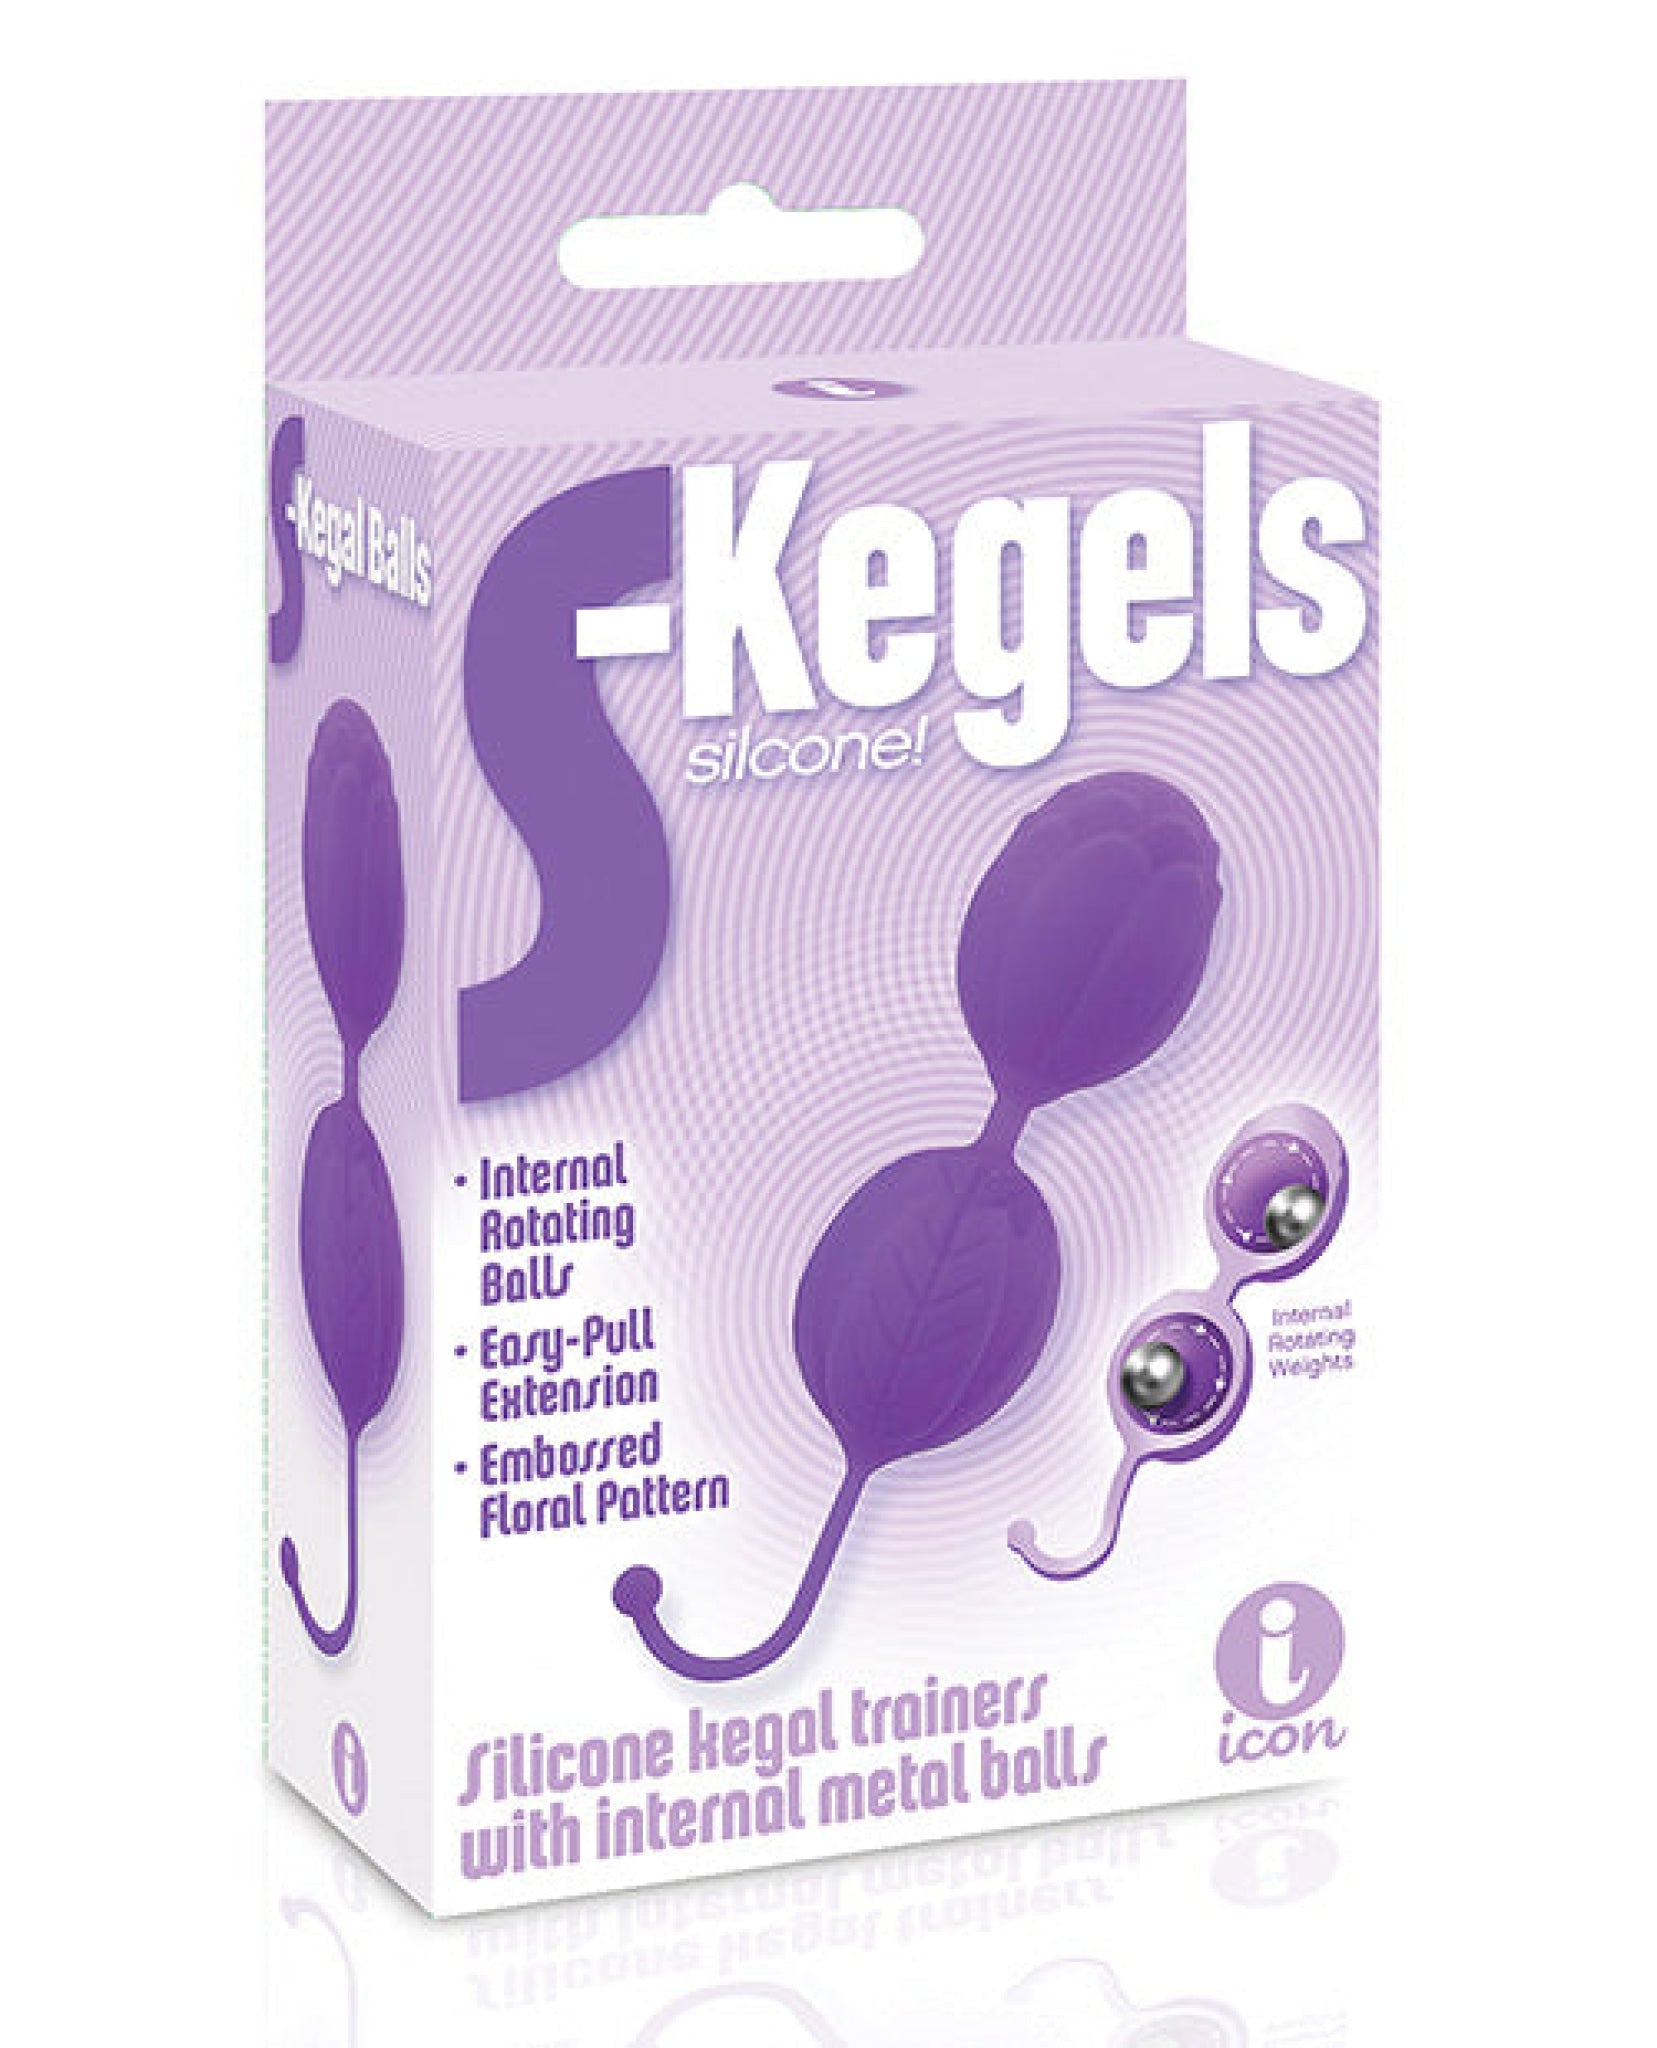 The 9's S-kegels Silicone Balls Icon